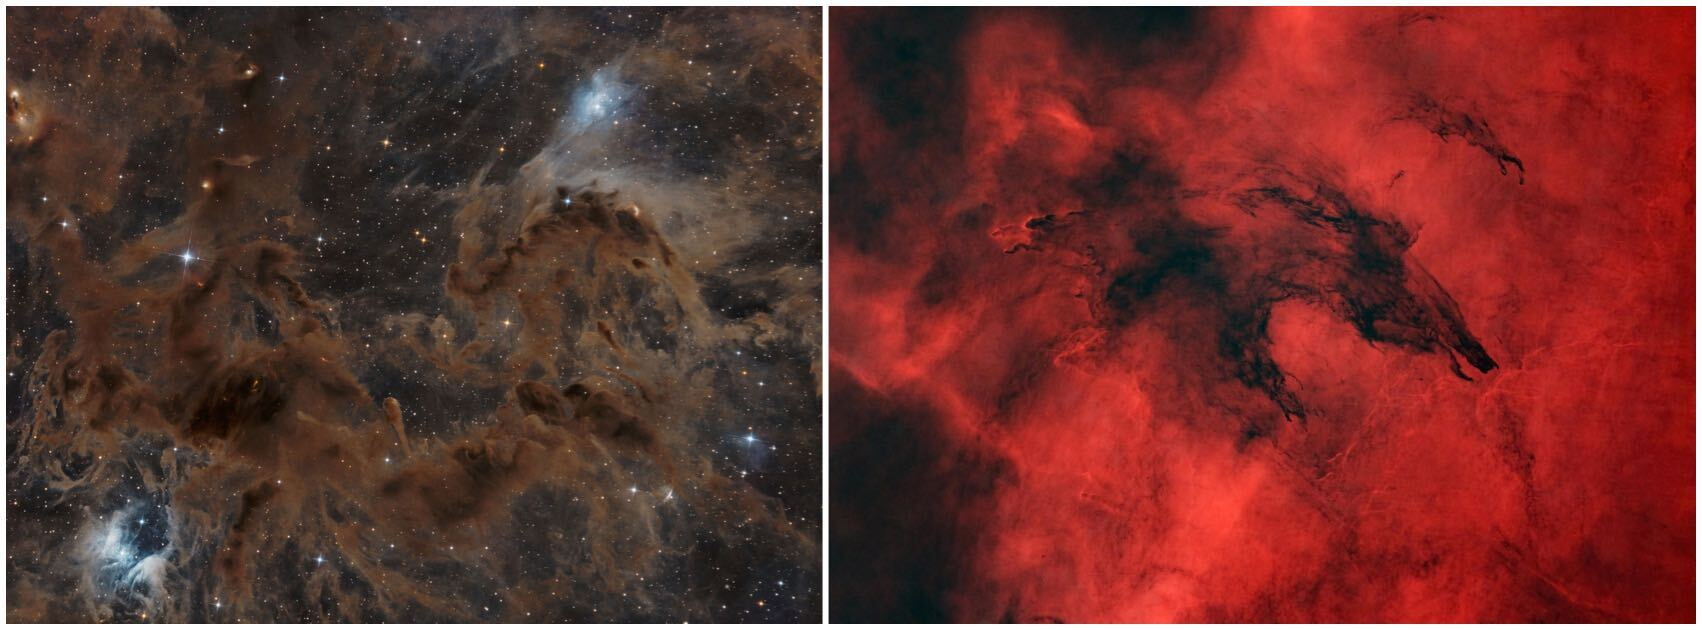 Images of the nebula, one brown and the other red.